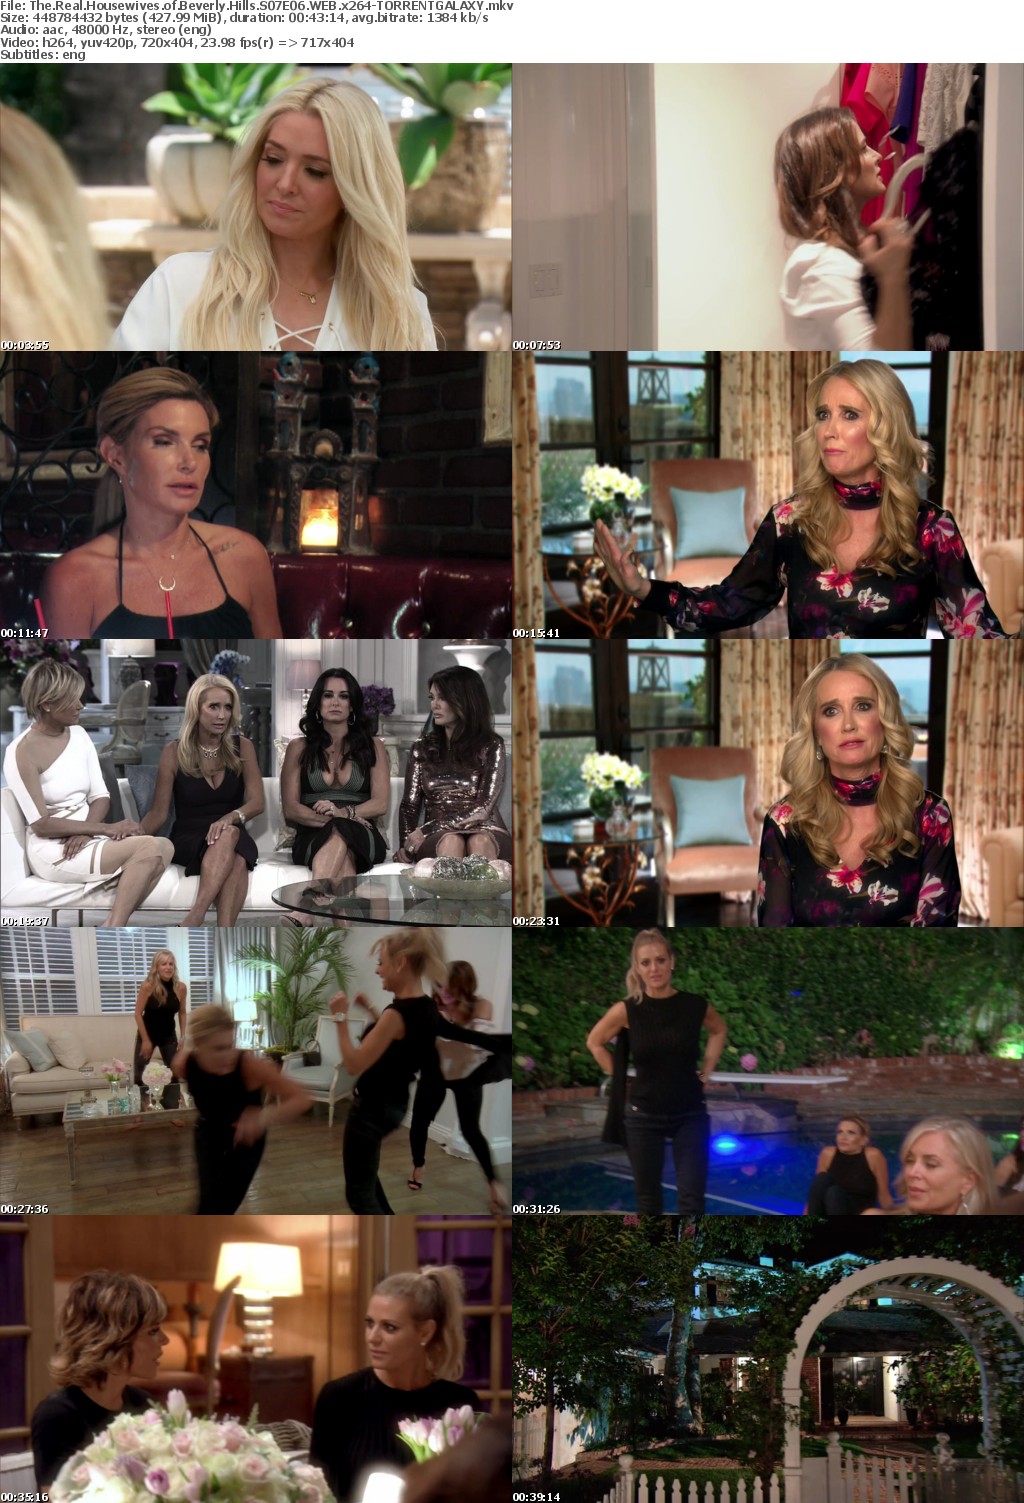 The Real Housewives of Beverly Hills S07E06 WEB x264-GALAXY